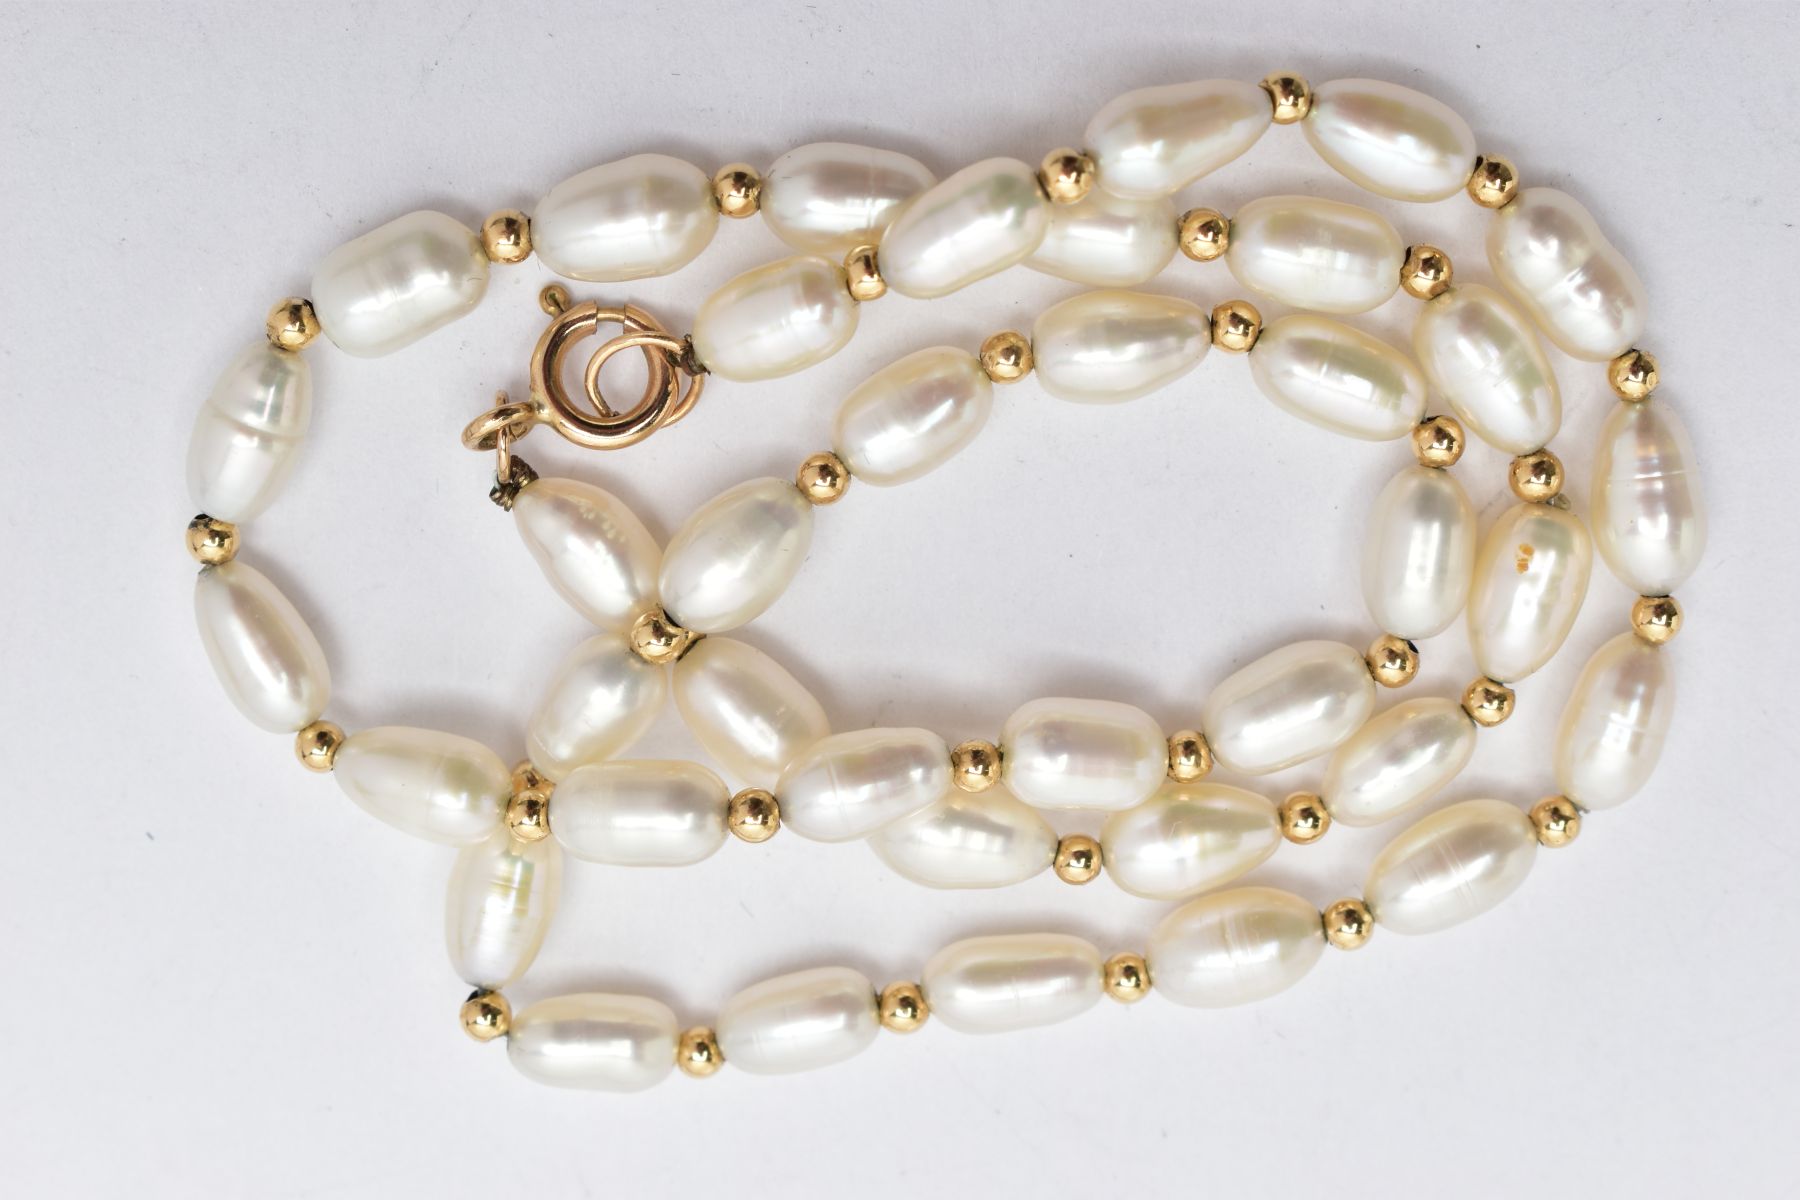 A CULTURED FRESHWATER PEARL NECKLACE, thirty-eight baroque fresh water pearls interspaced between - Image 3 of 3